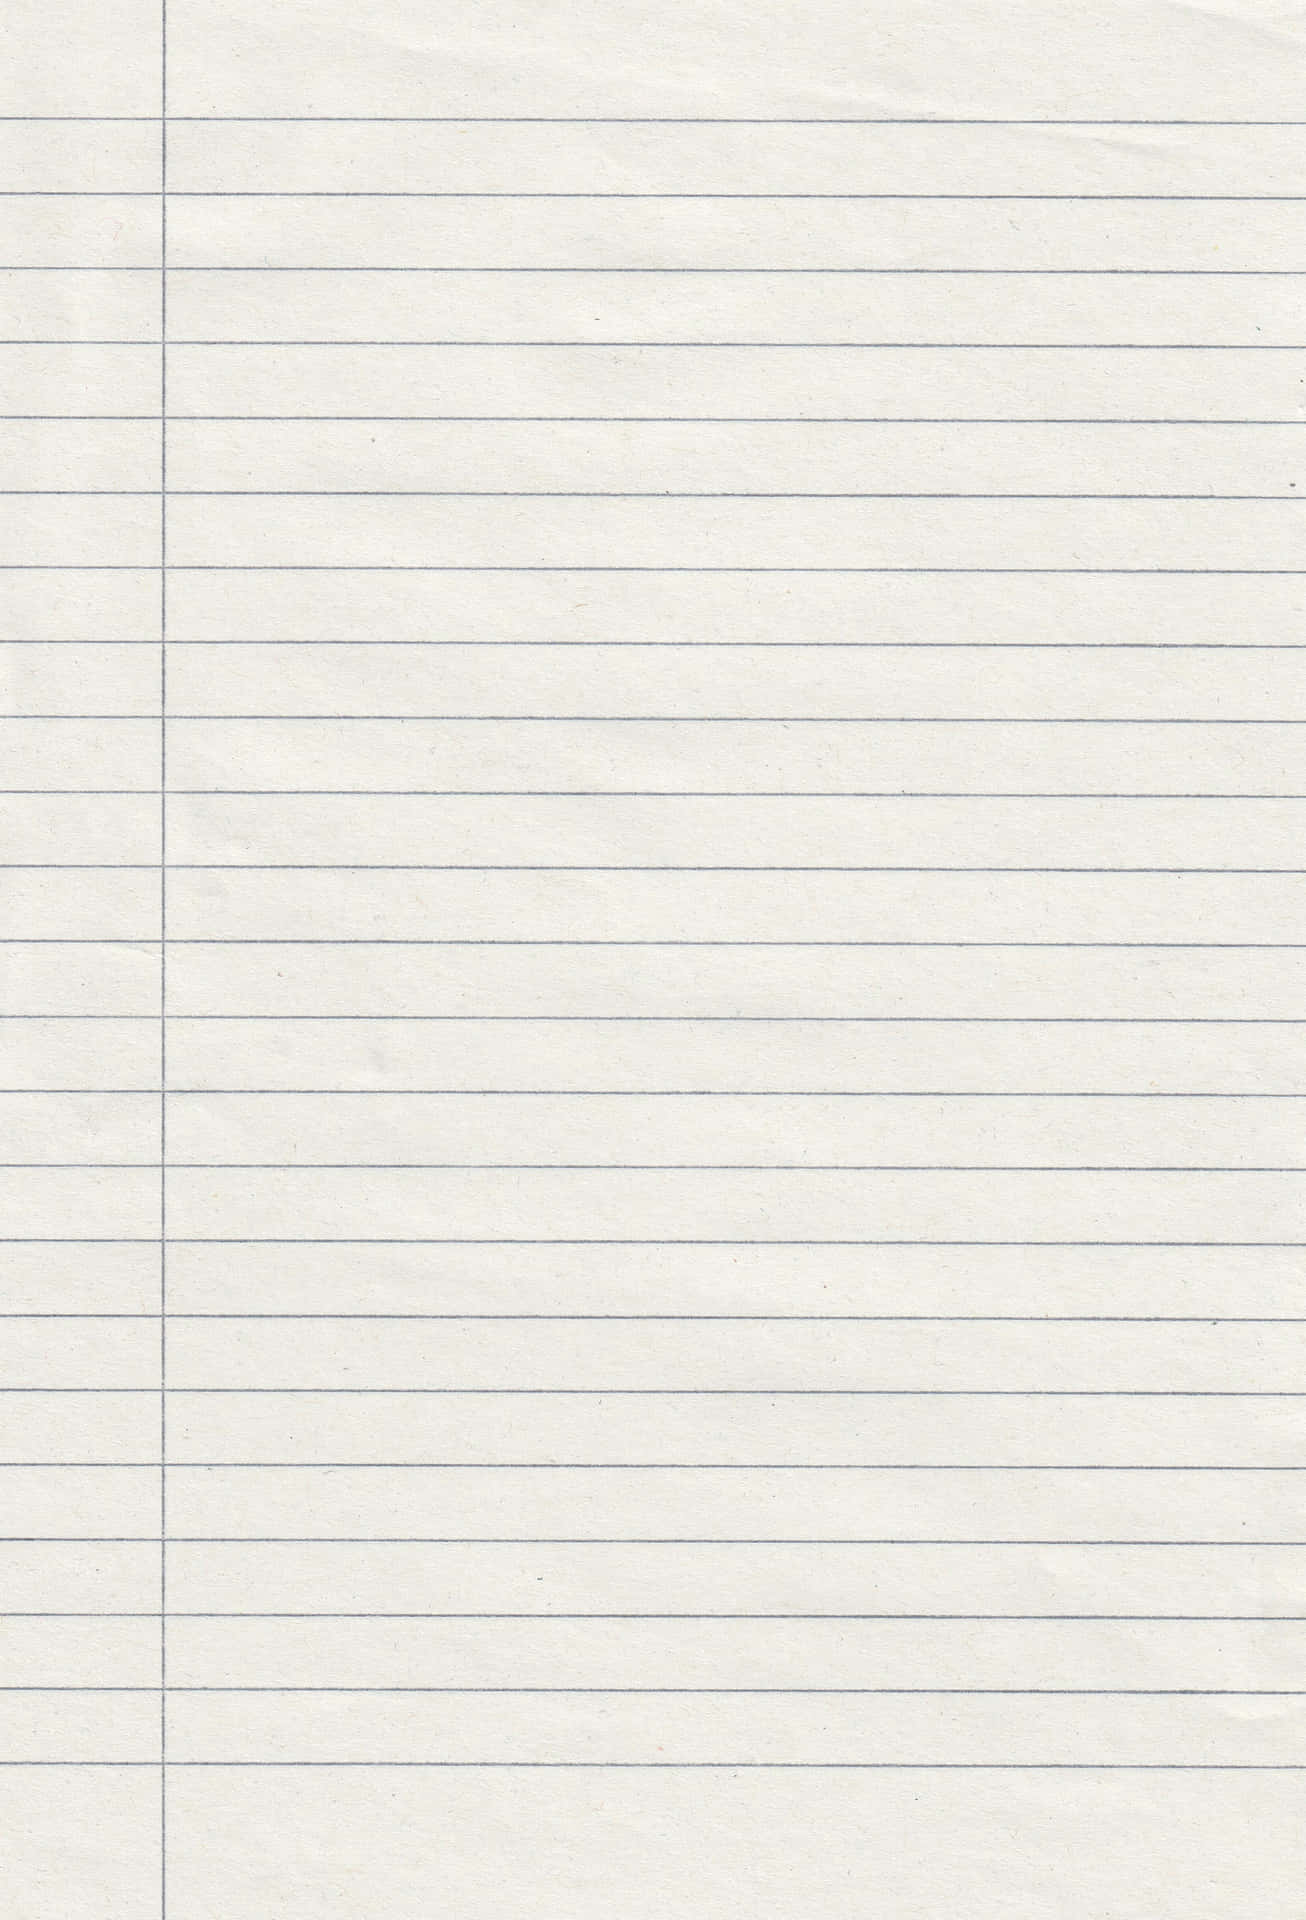 100+] Lined Paper Backgrounds